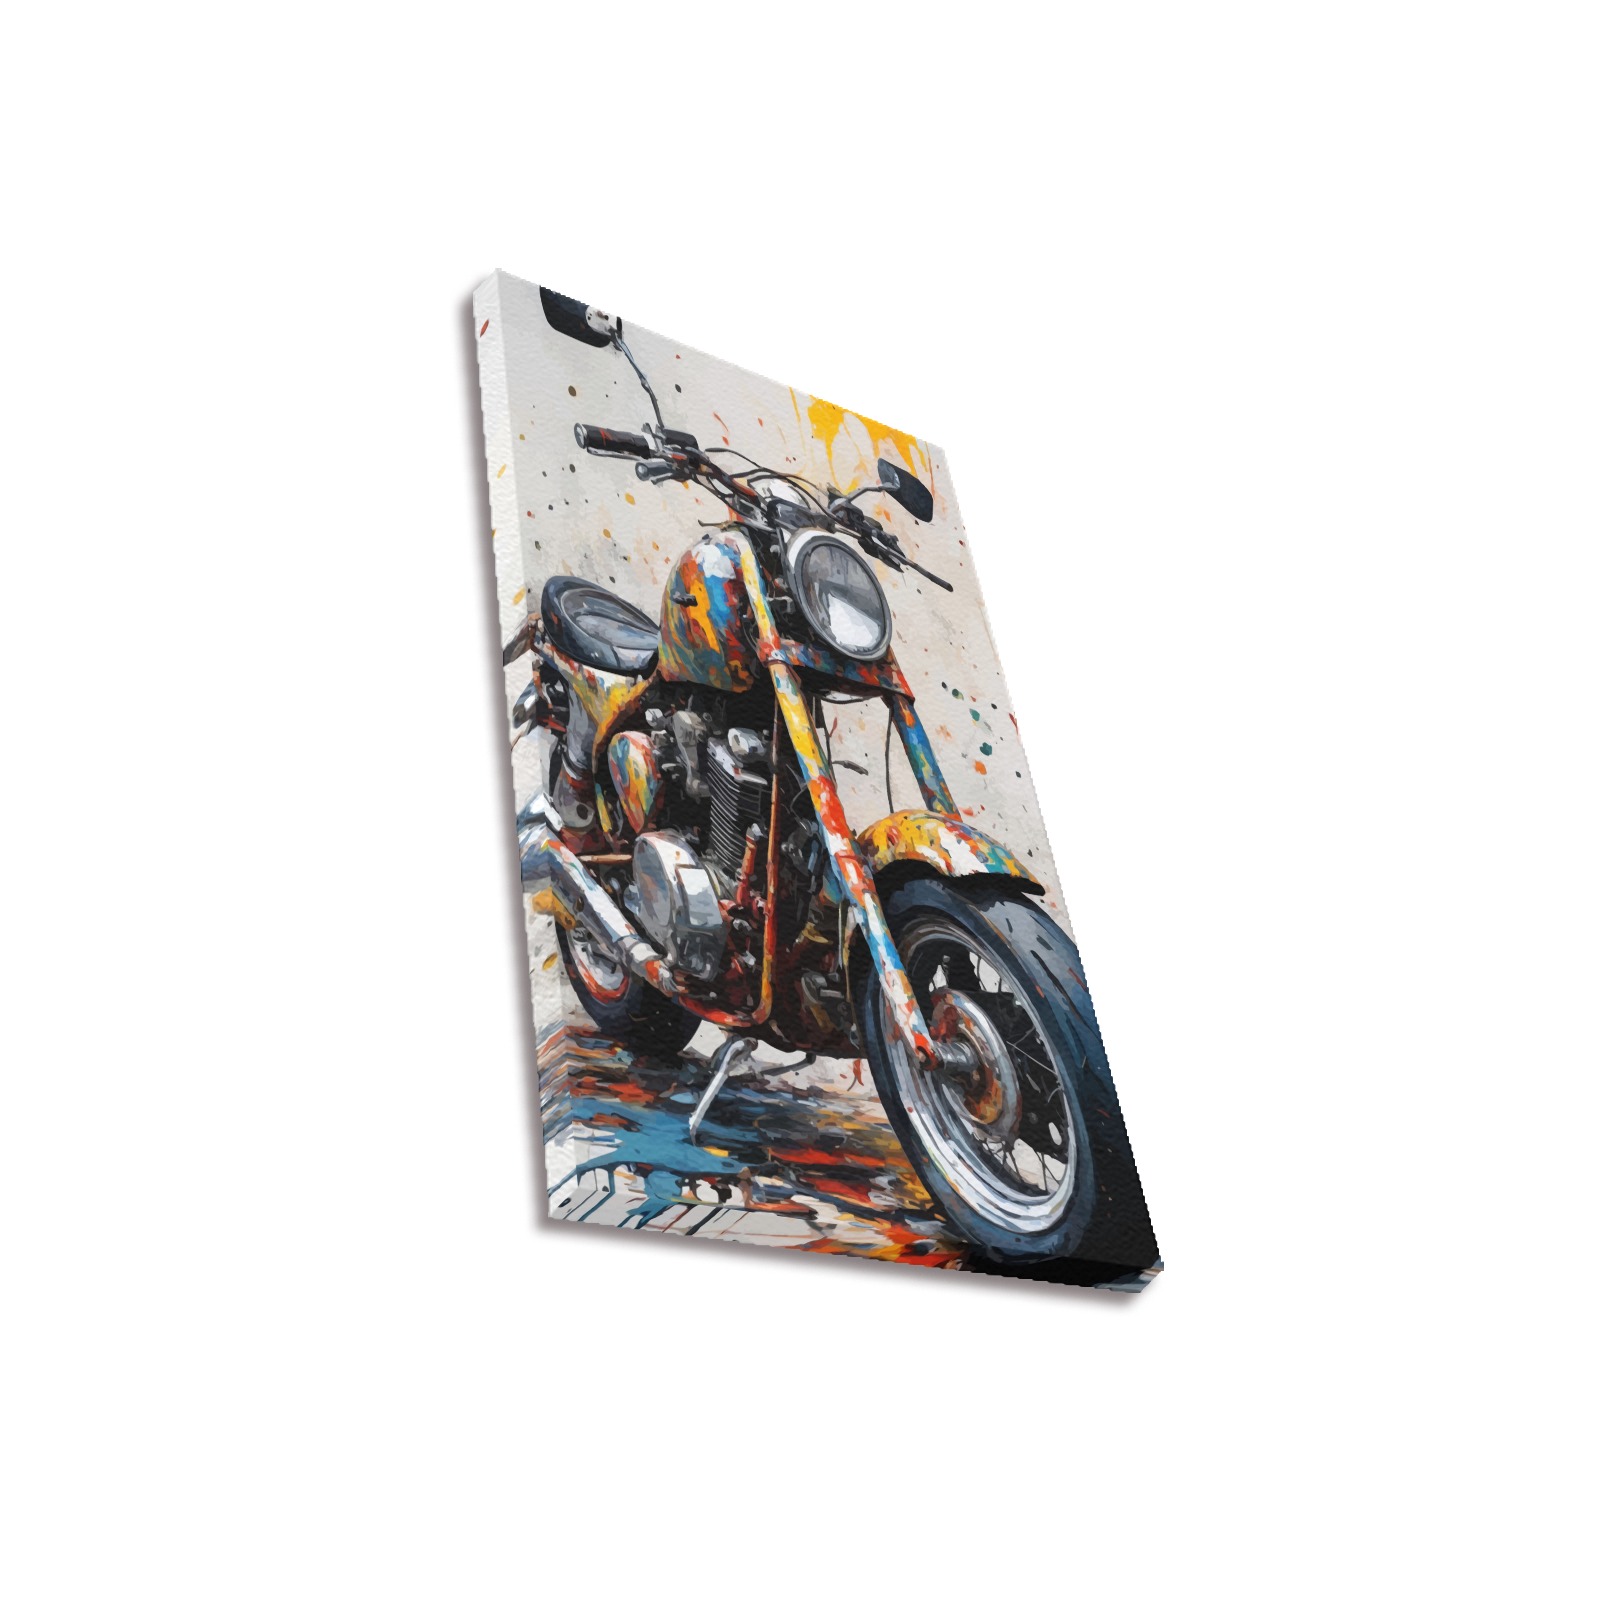 Cool vintage motorbike and splatters of colors art Upgraded Canvas Print 12"x18"